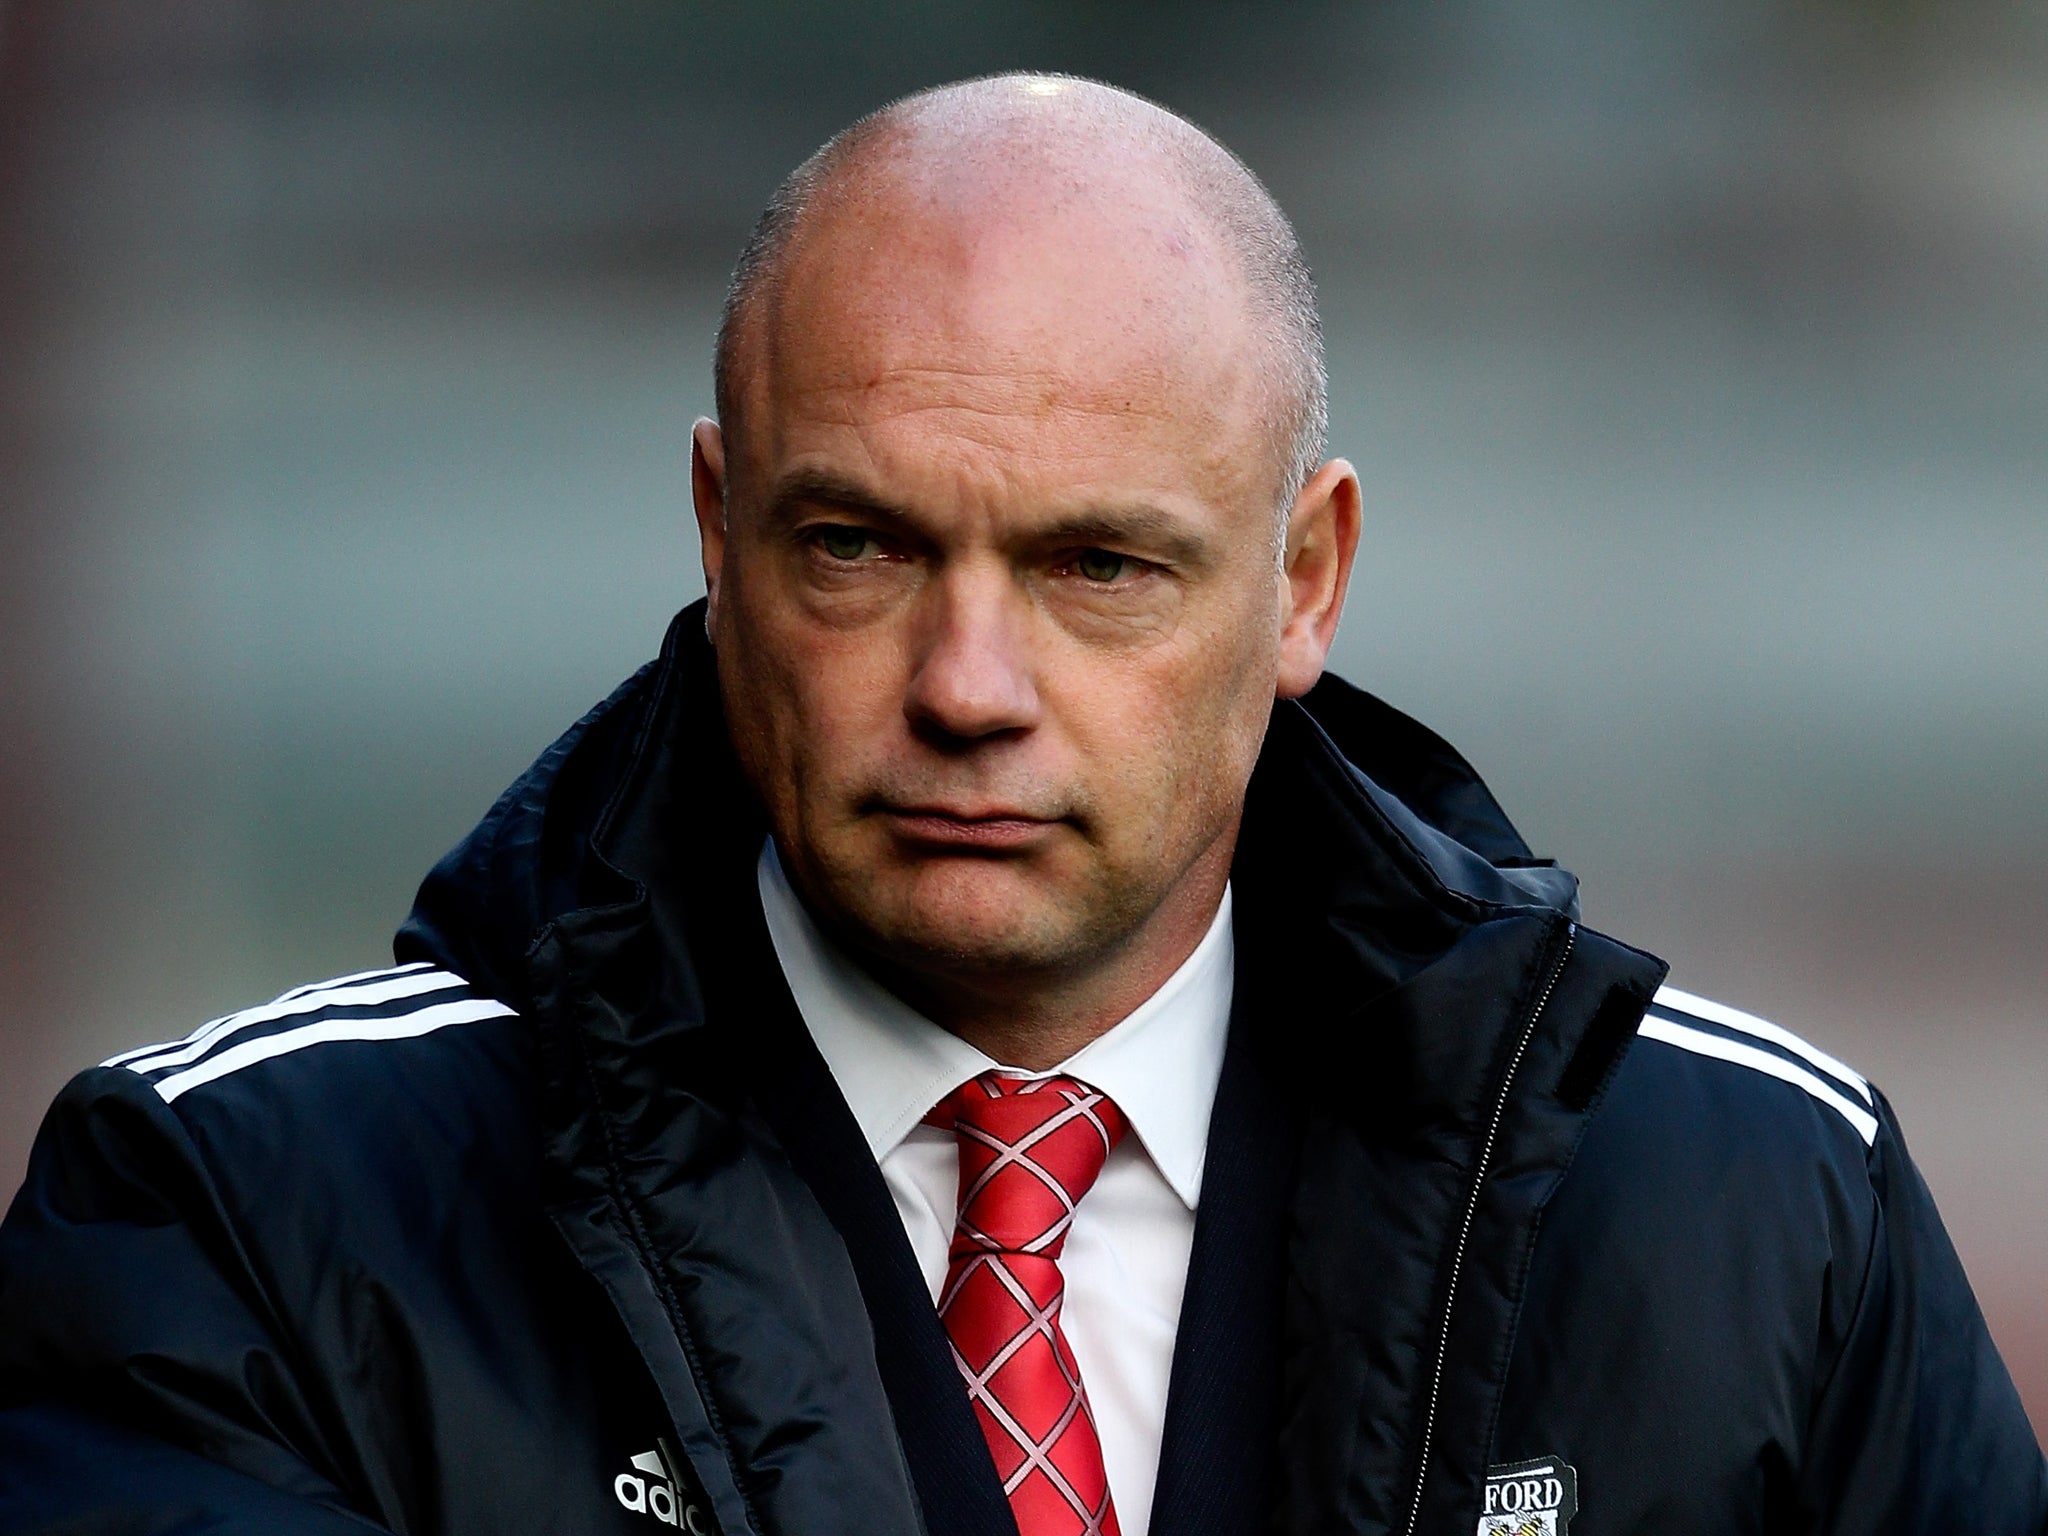 Wigan have announced Uwe Rosler as their new manager after reaching an agreement for his release with Brentford